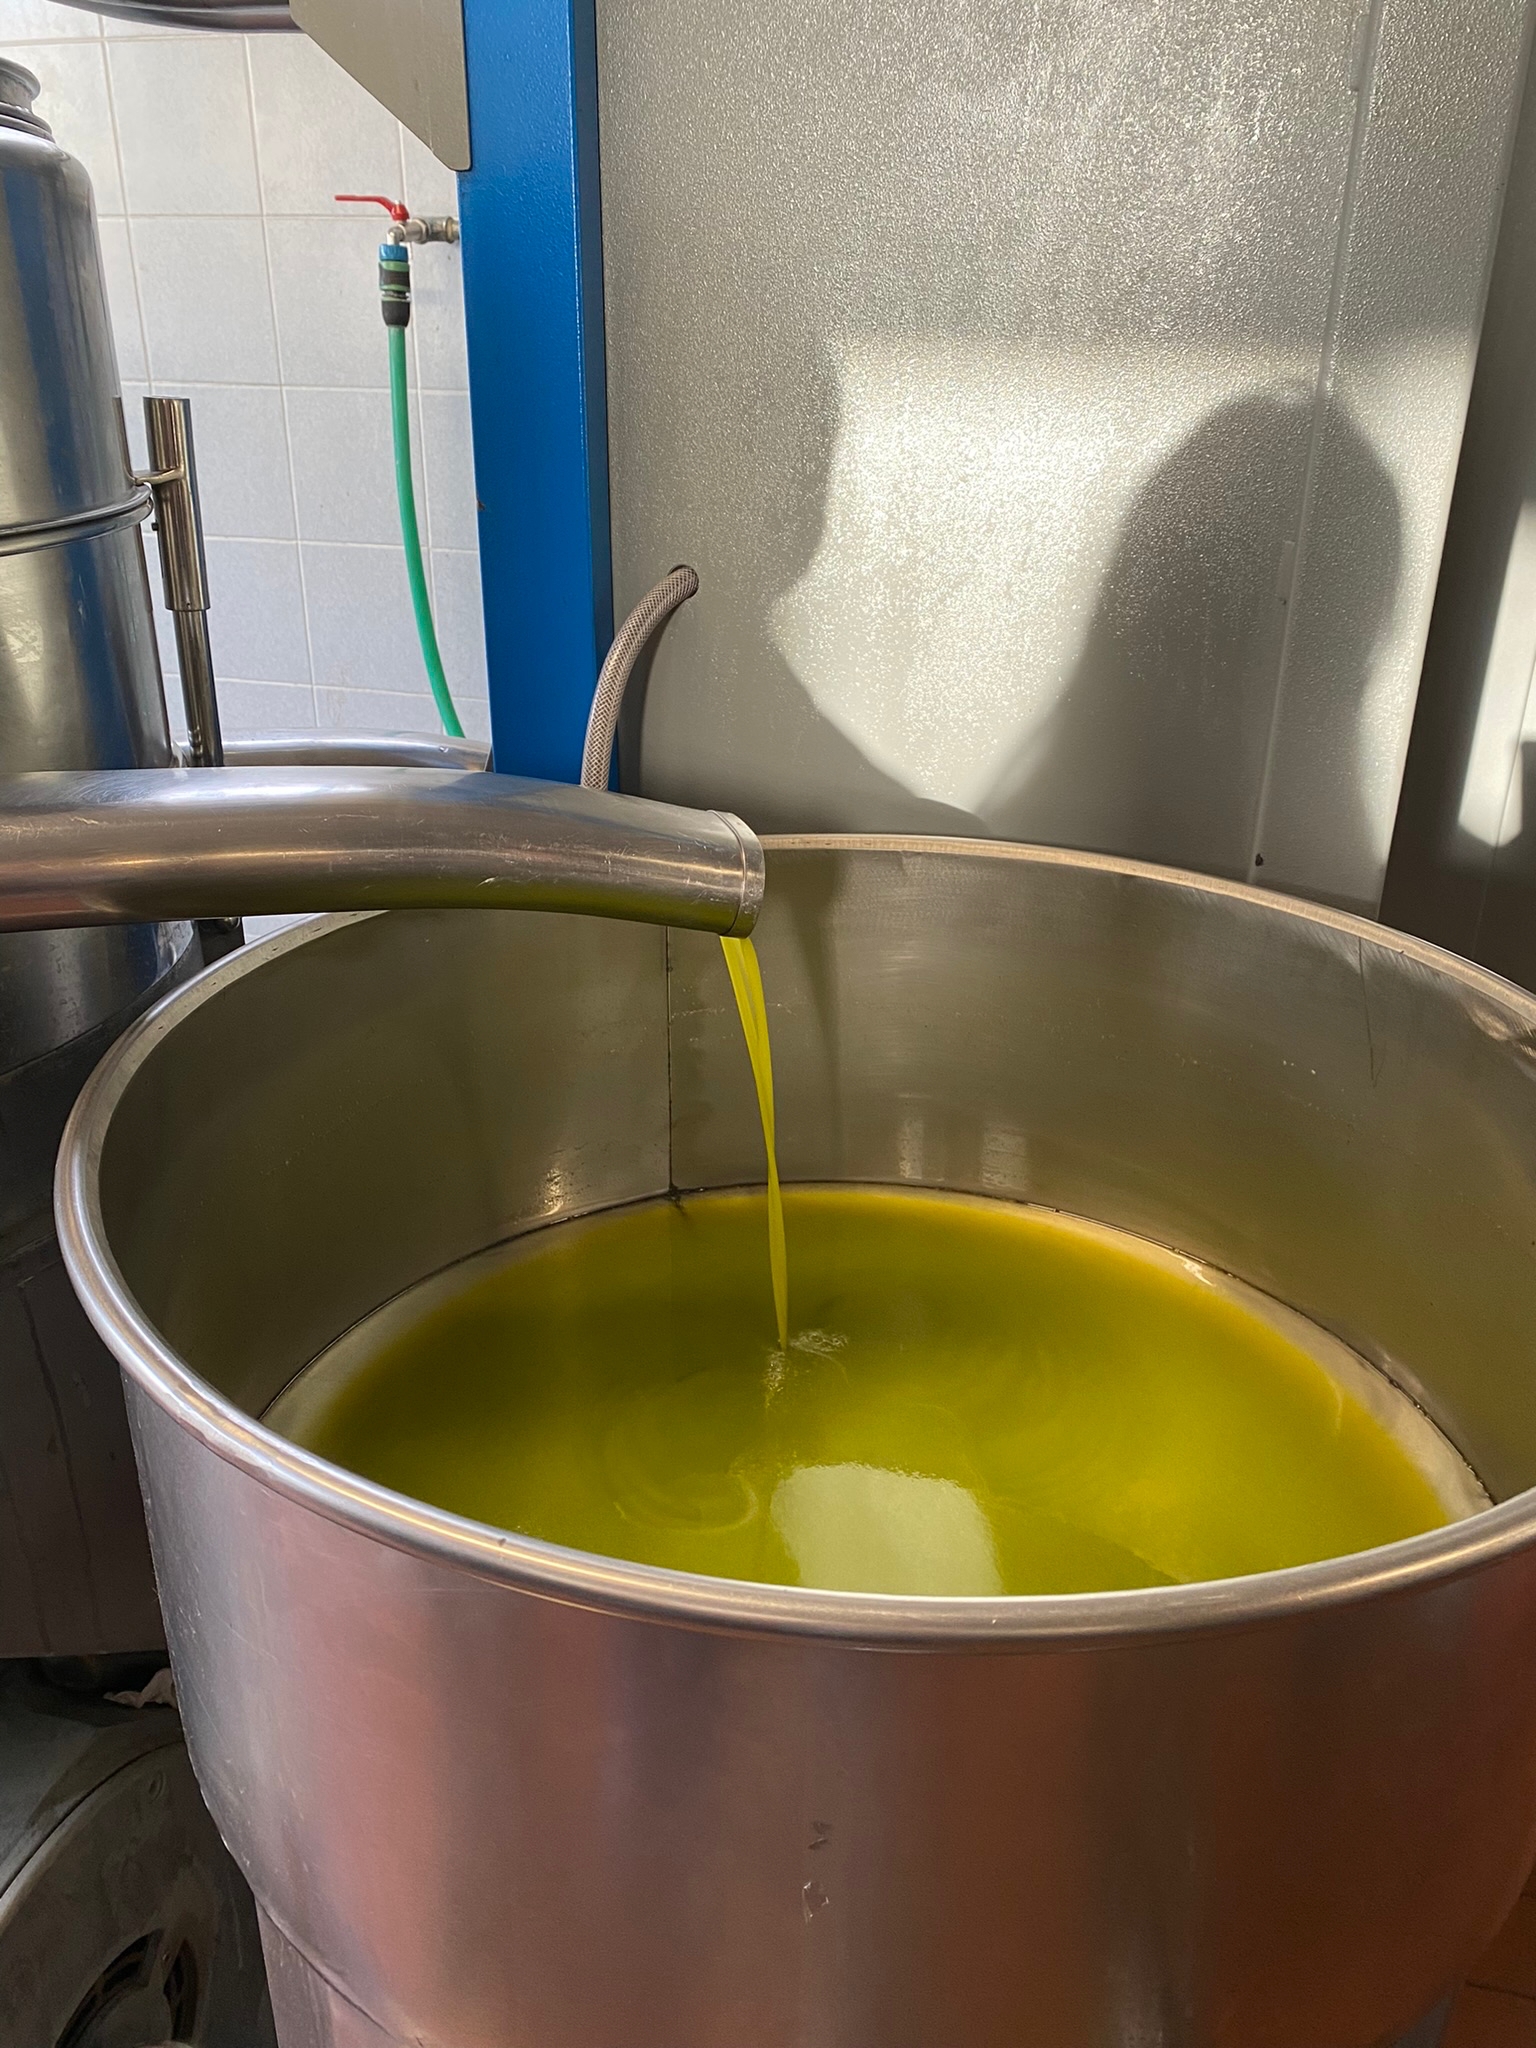 olive oil production